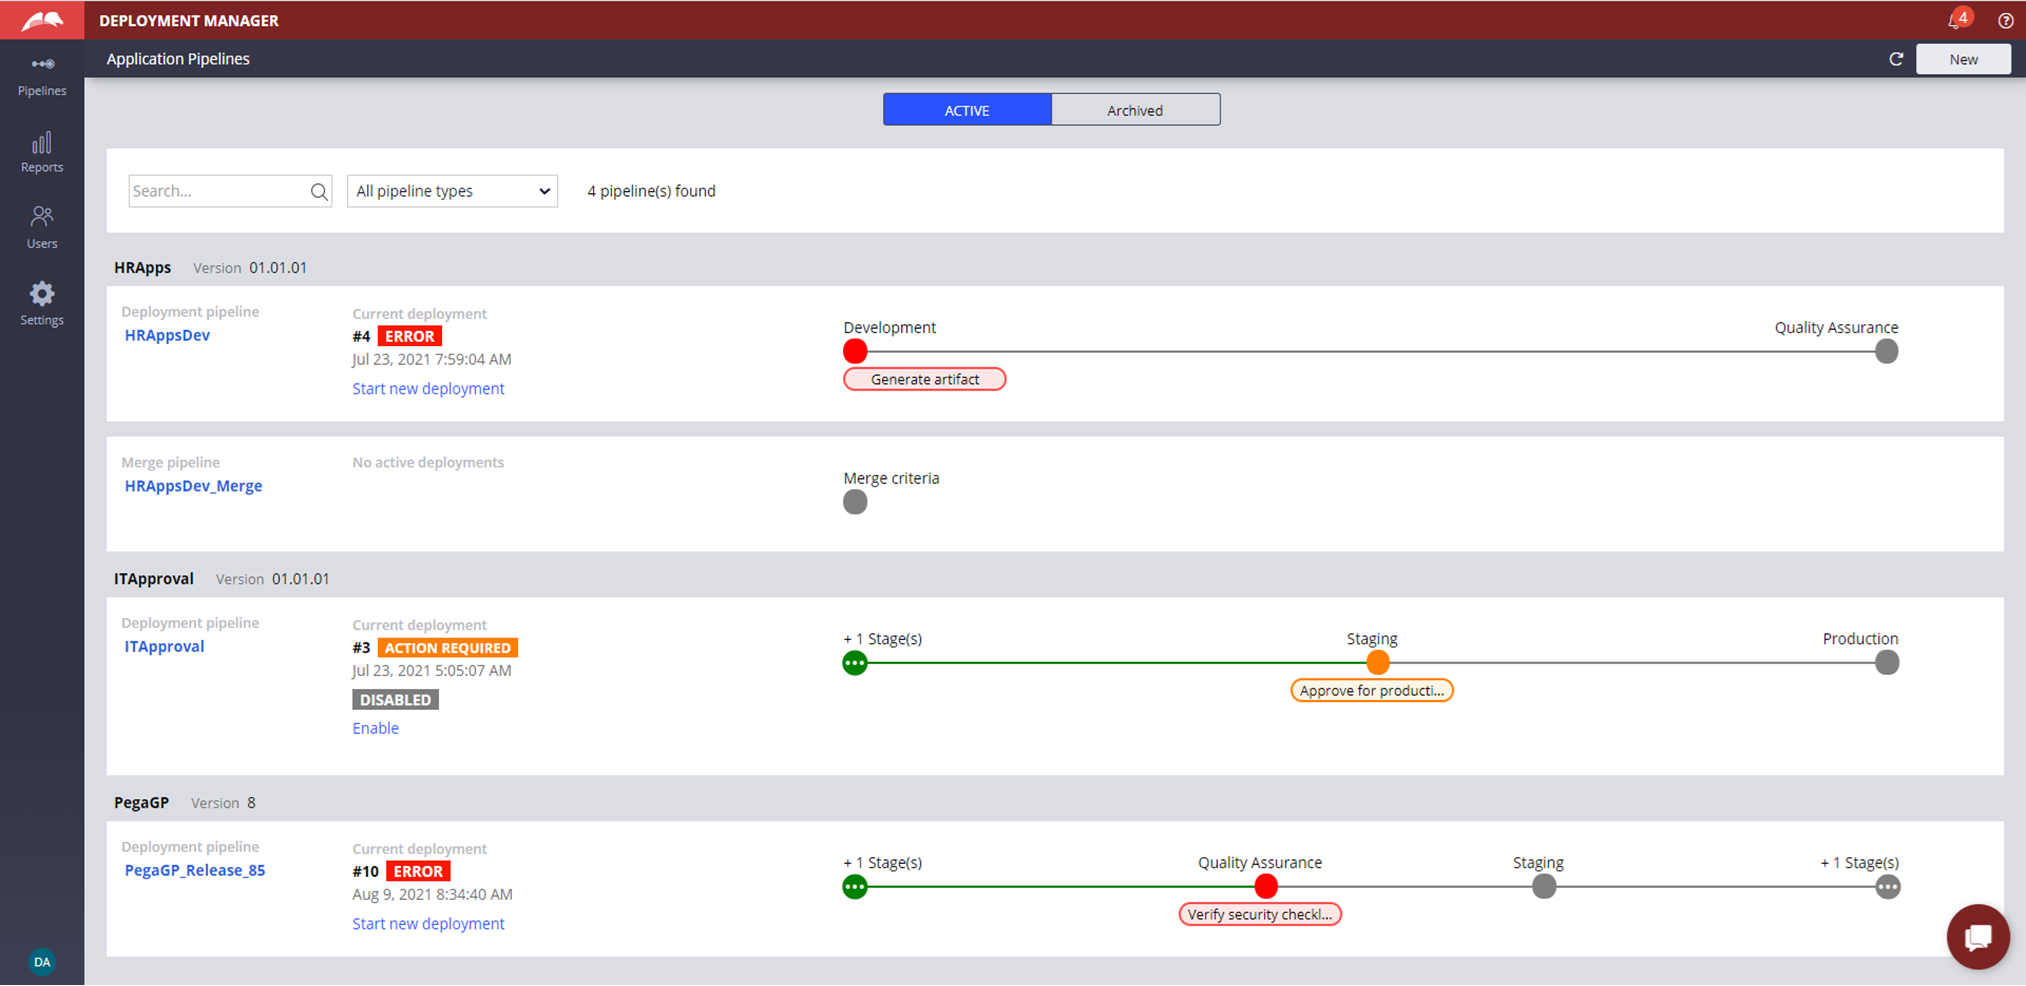 Deployment Manager dashboard provides a quick access to all your pipelines at one place.